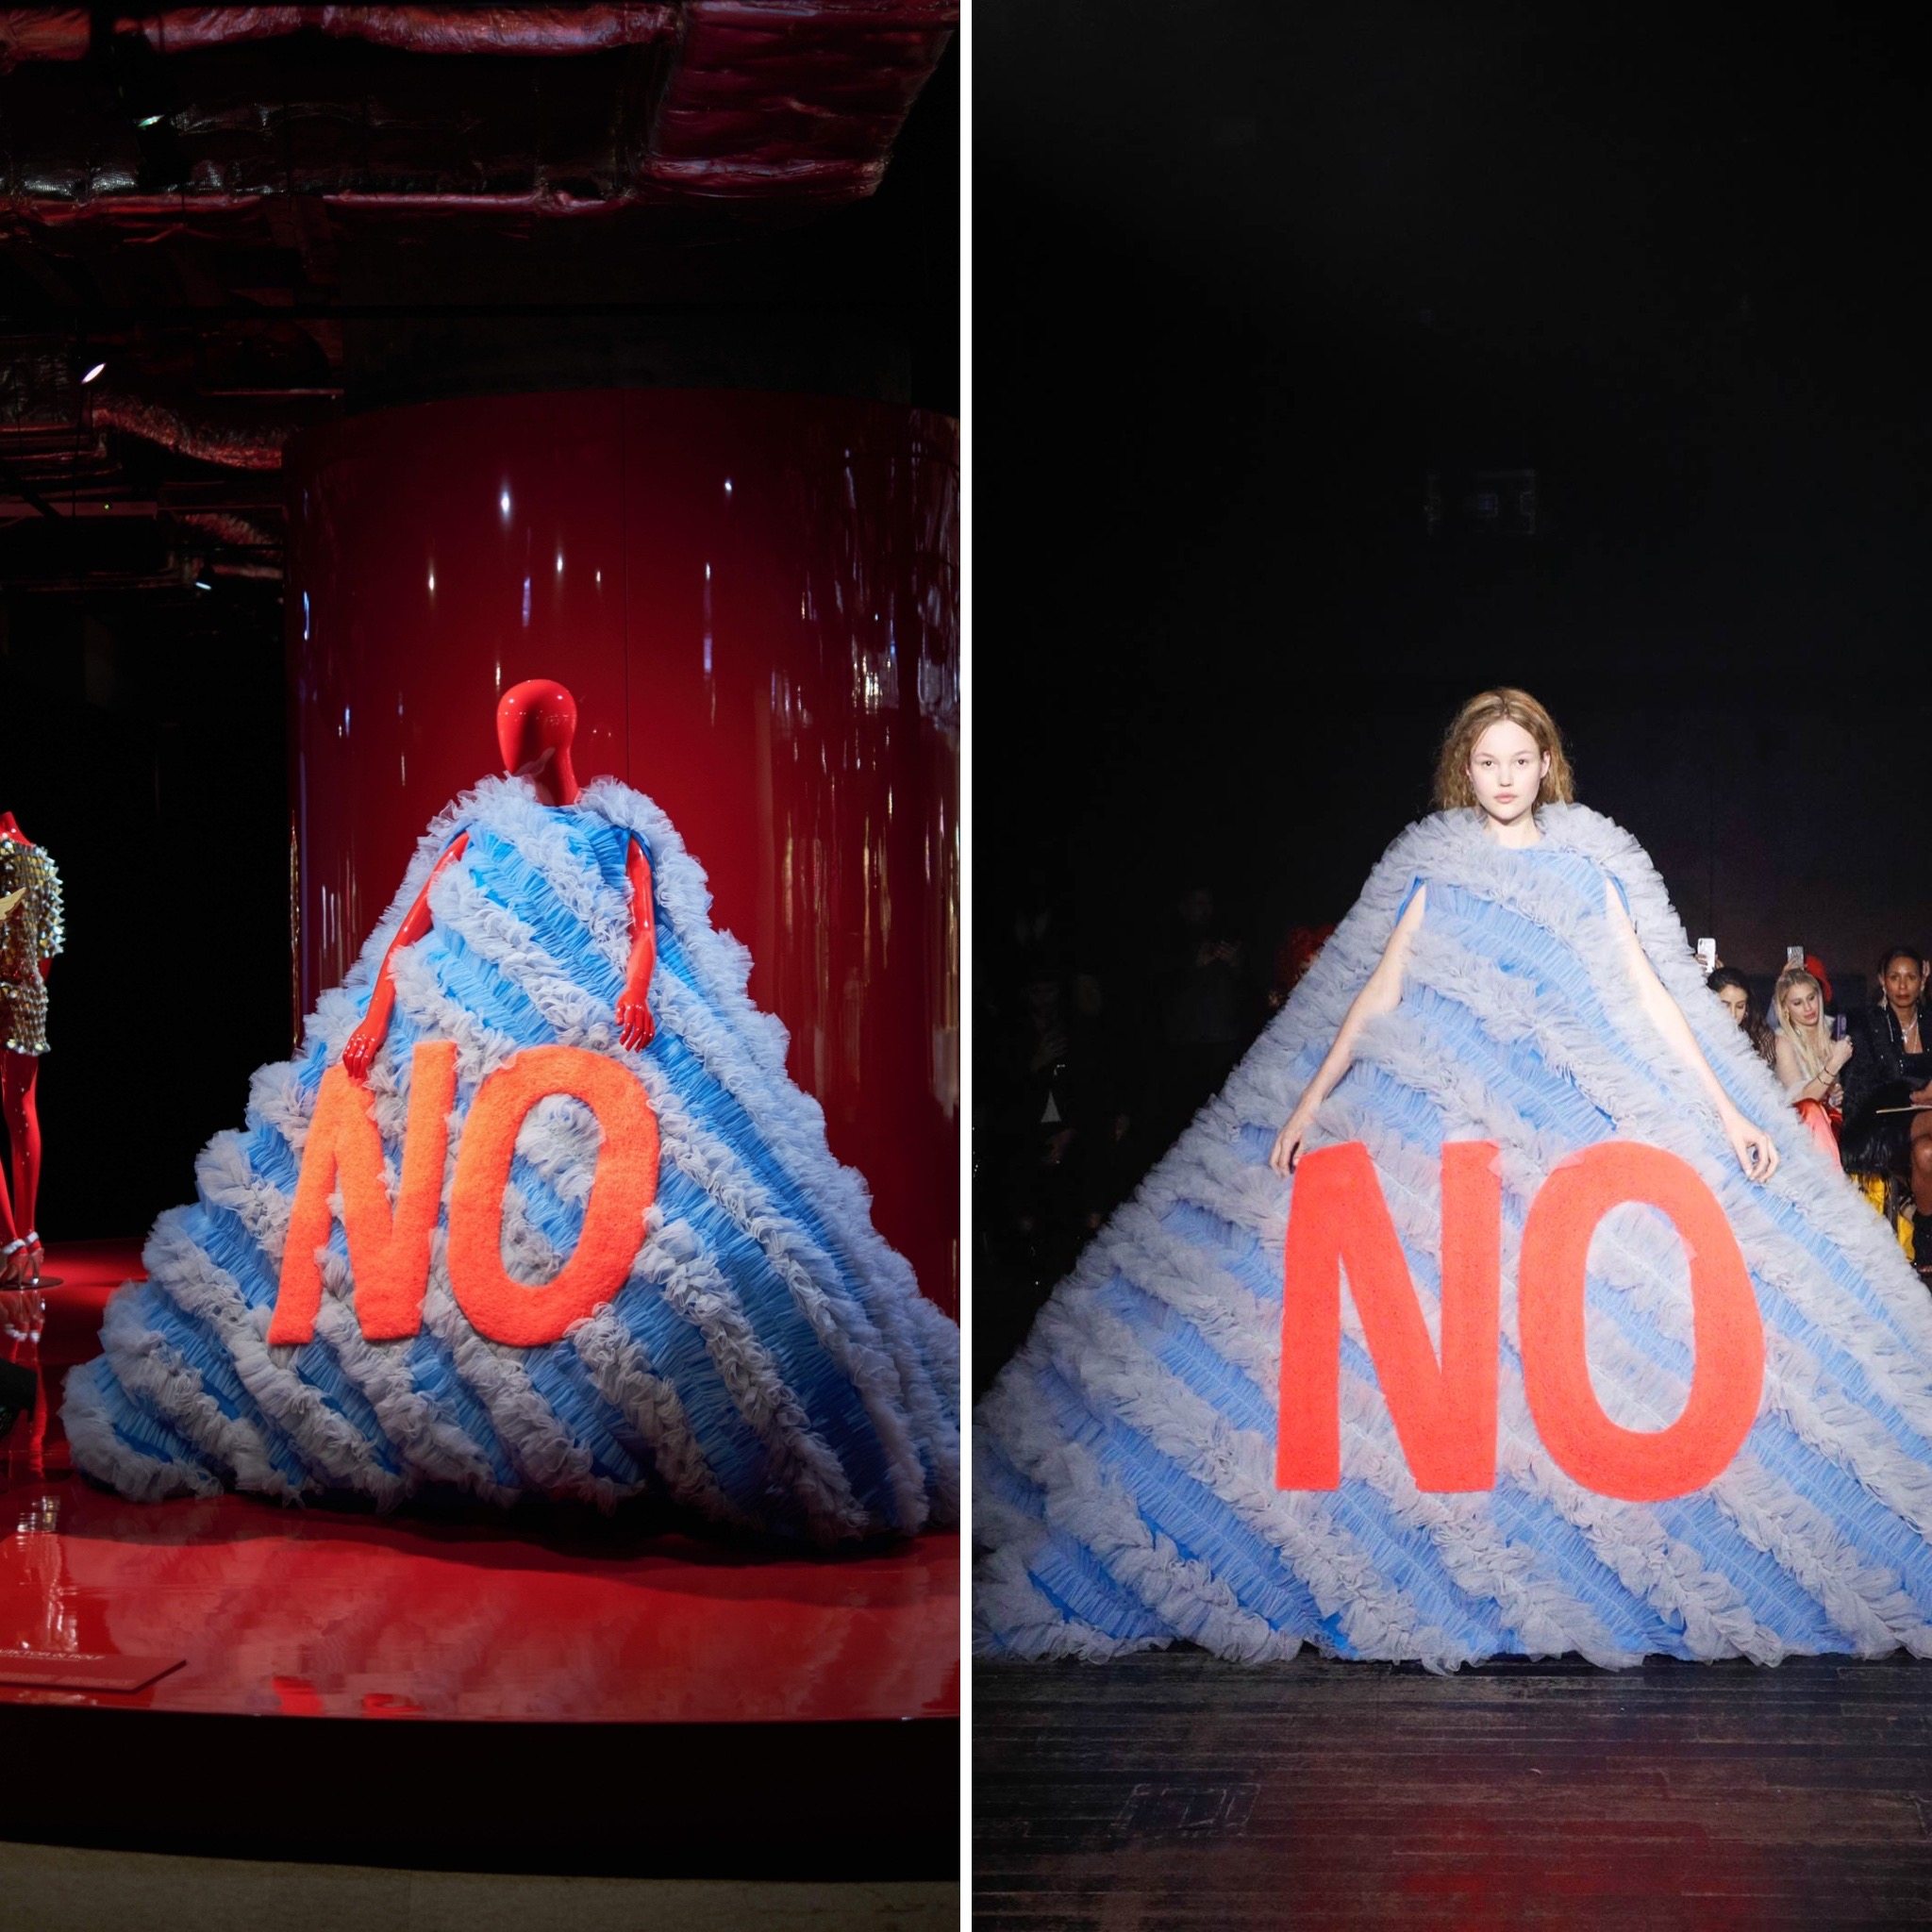 (Left) A dress from Viktor & Rolf’s spring/summer 2019 couture collection on display at K11 Musea’s “Savoir Faire: The Mastery of Craft in Fashion” exhibition; (Right) A model wears the dress at the spring/summer 2019 show.